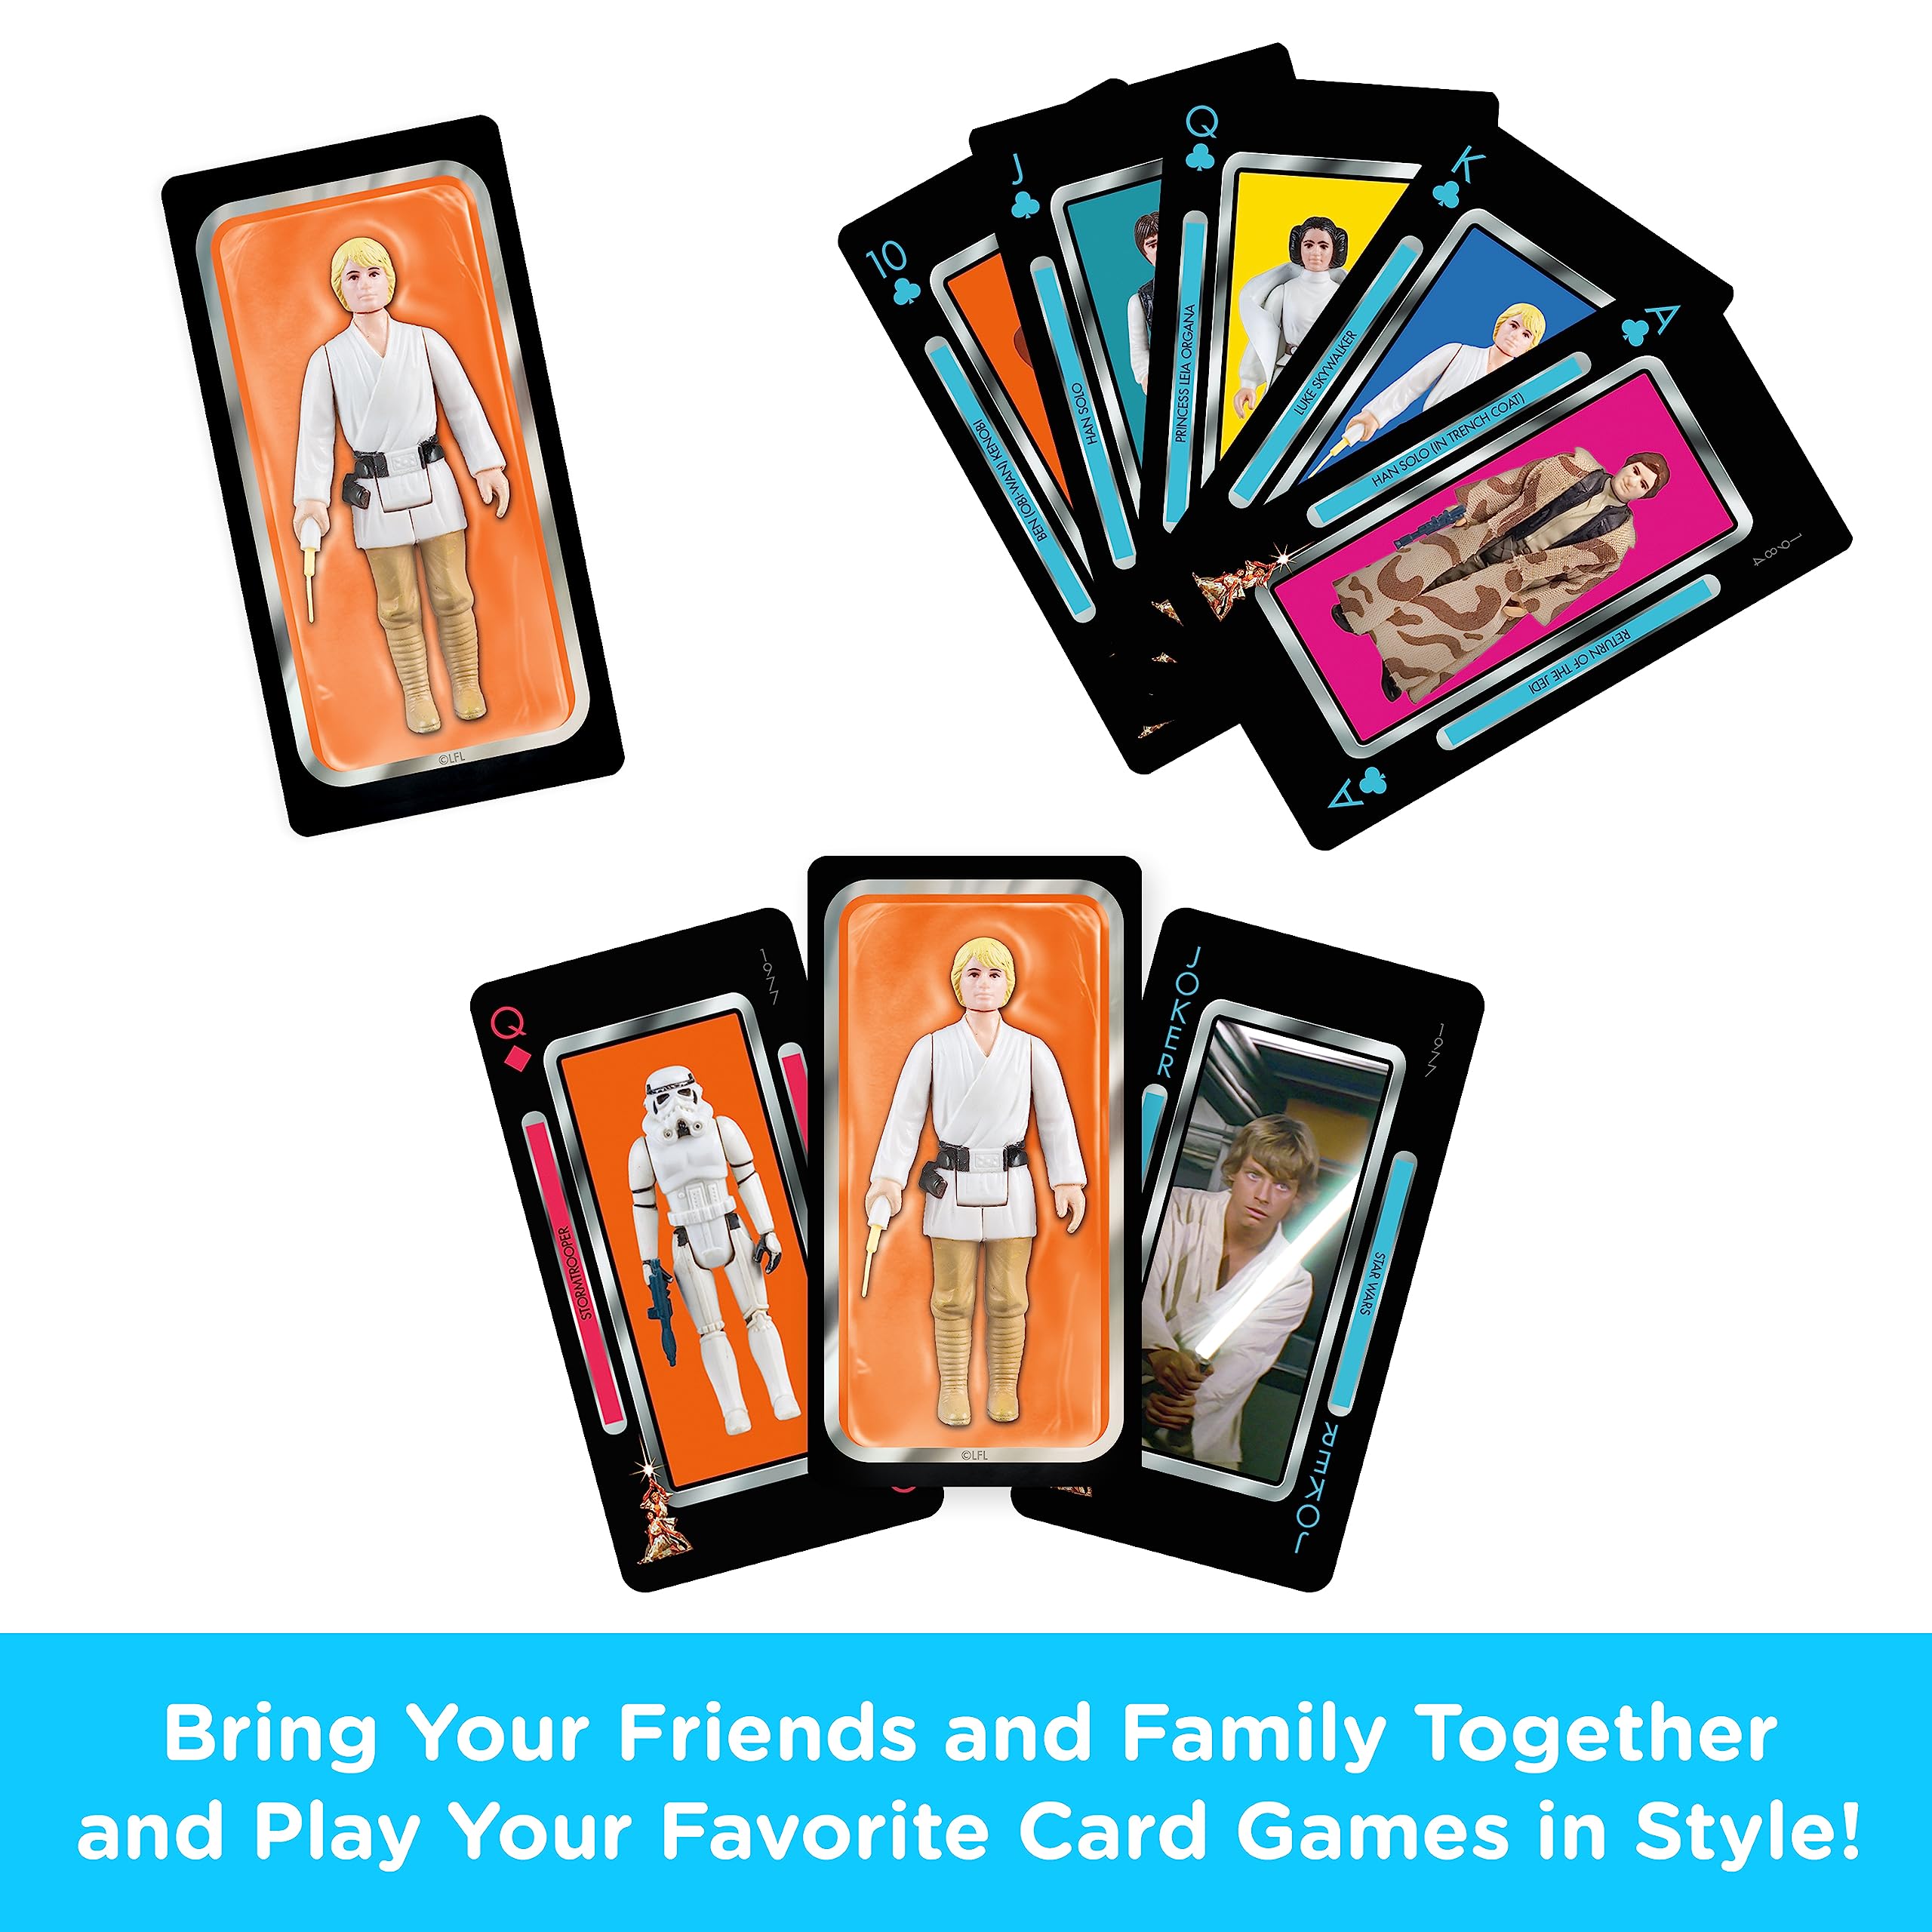 Aquarius Star Wars Luke Skywalker Premium Playing Cards - Luke Skywalker Themed Deck of Cards for Your Favorite Card Games - Officially Licensed Star Wars Merchandise & Collectibles